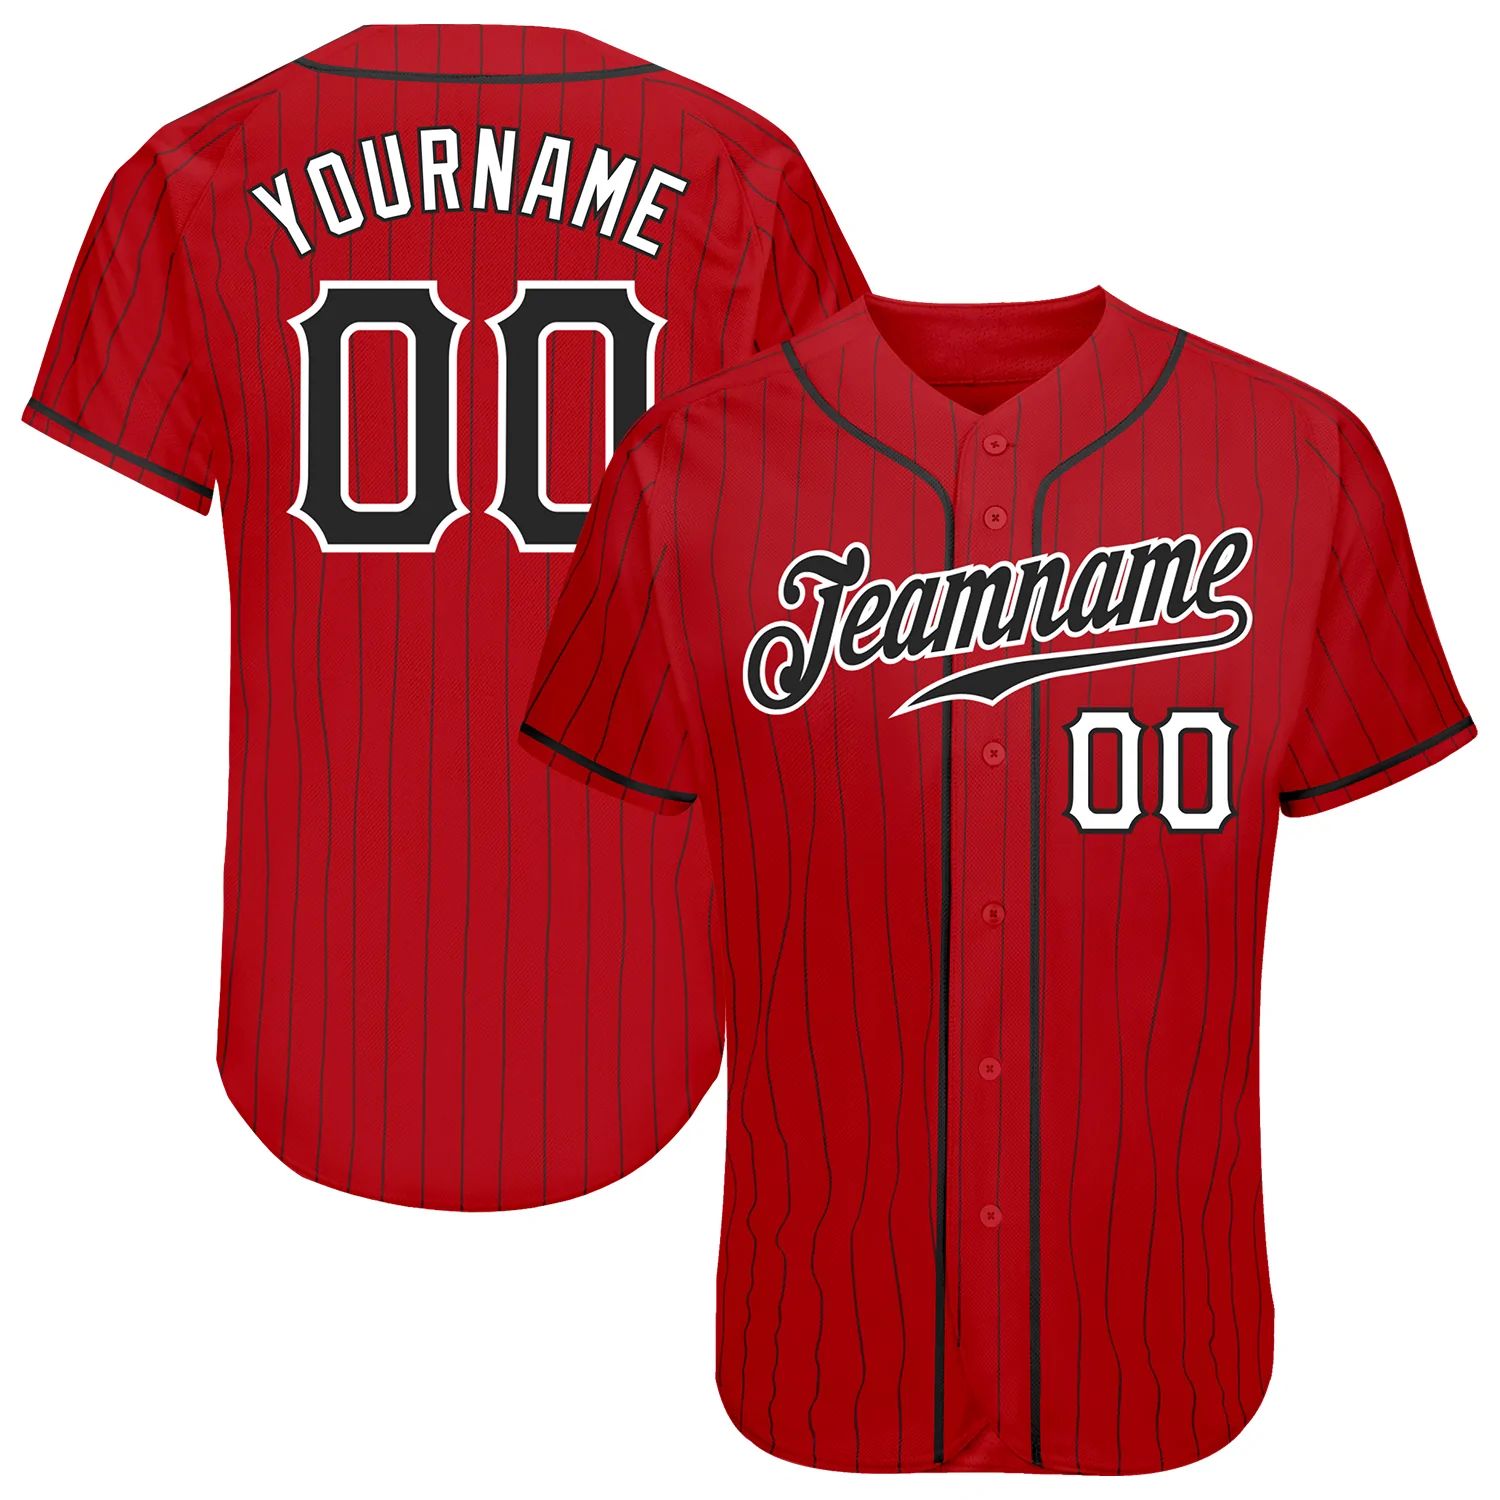 build-white-red-pinstripe-baseball-black-jersey-authentic-red0431-online-1.jpg